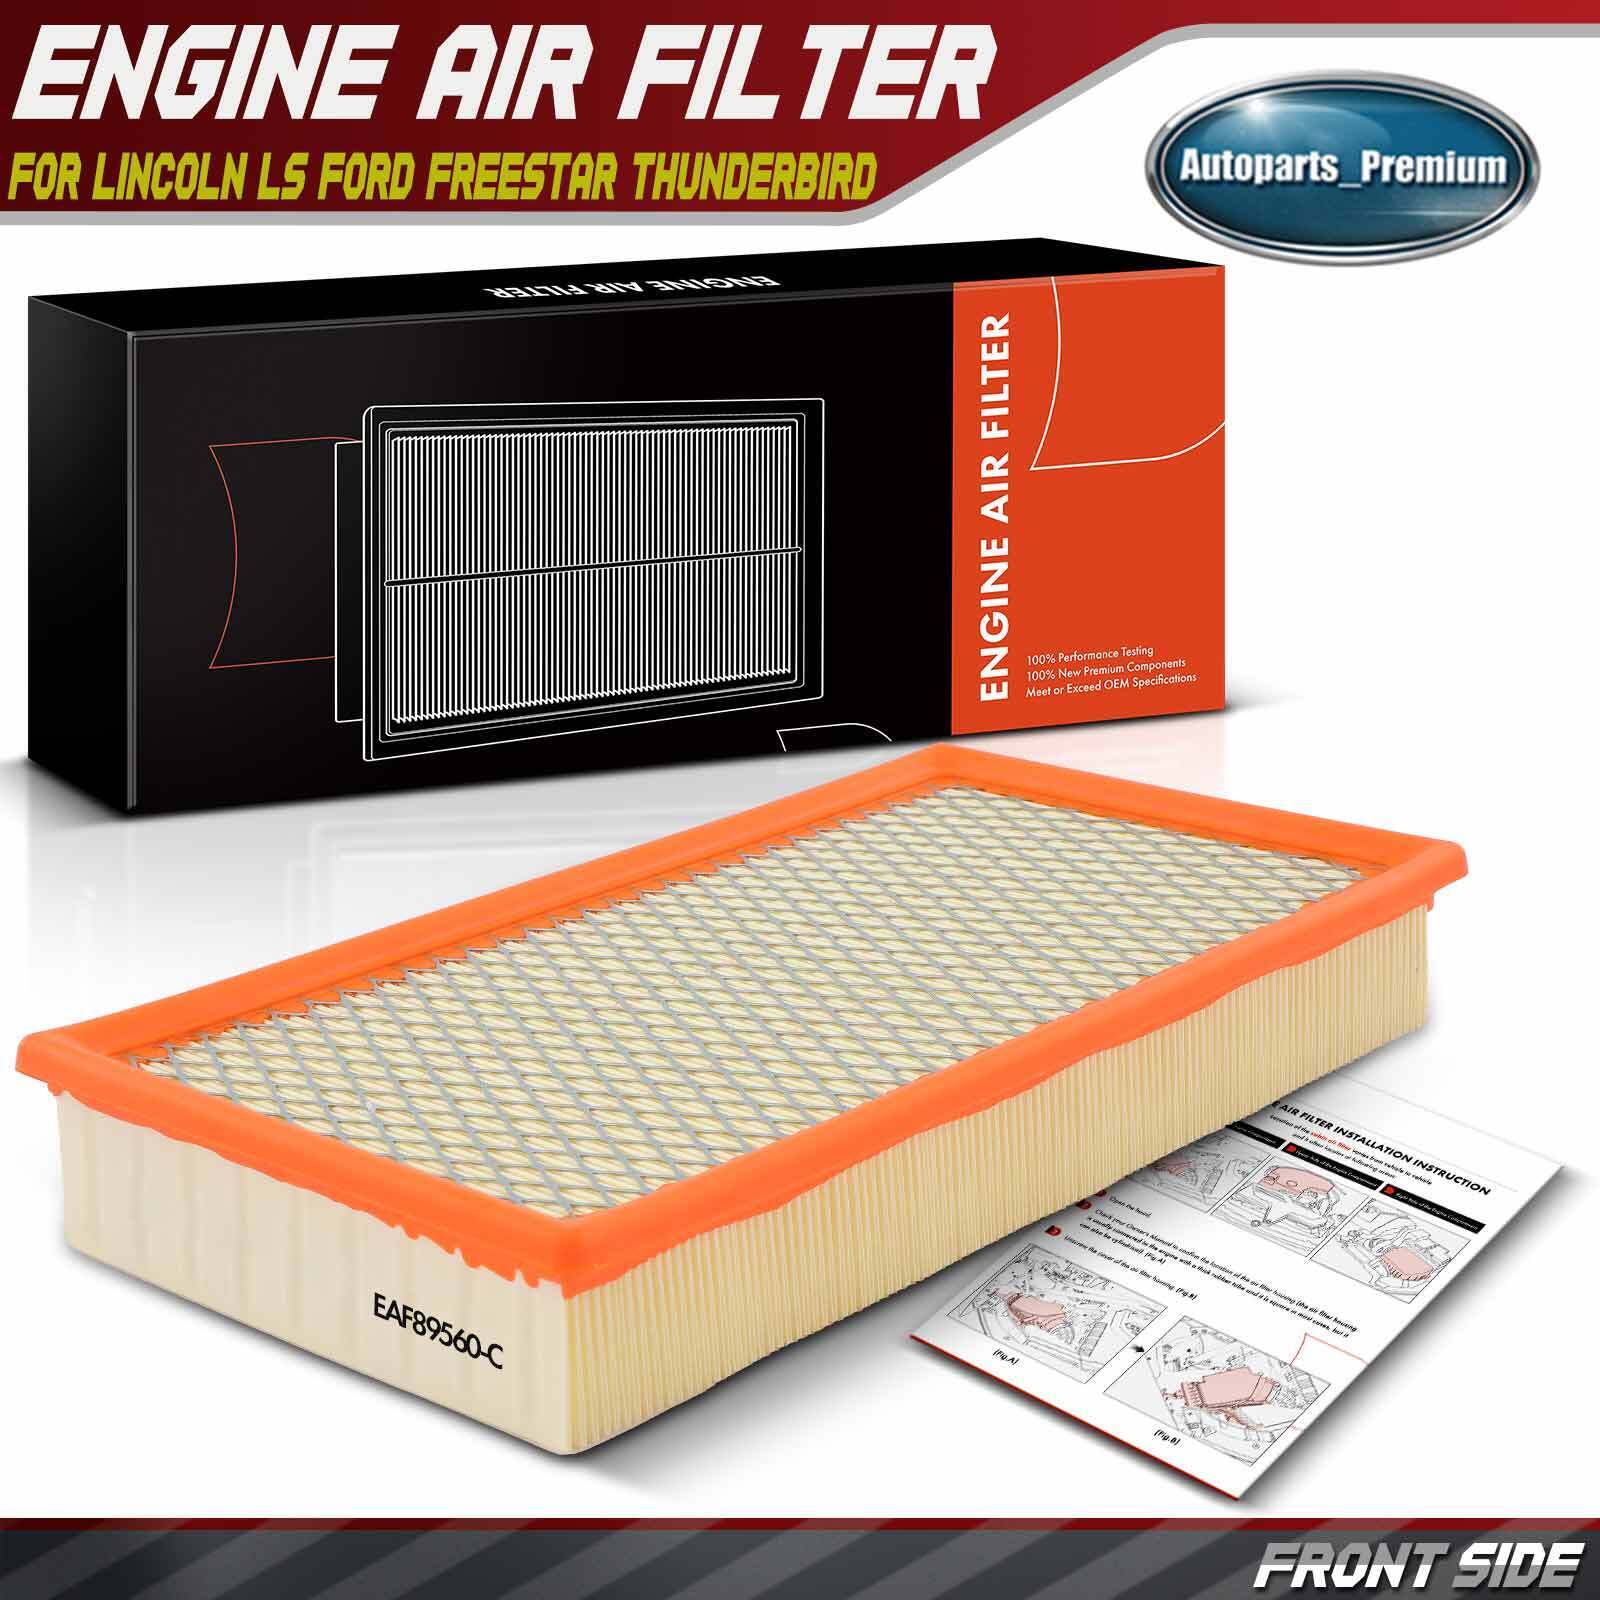 Engine Air Filter with Flexible Panel for Ford Freestar Thunderbird Lincoln LS